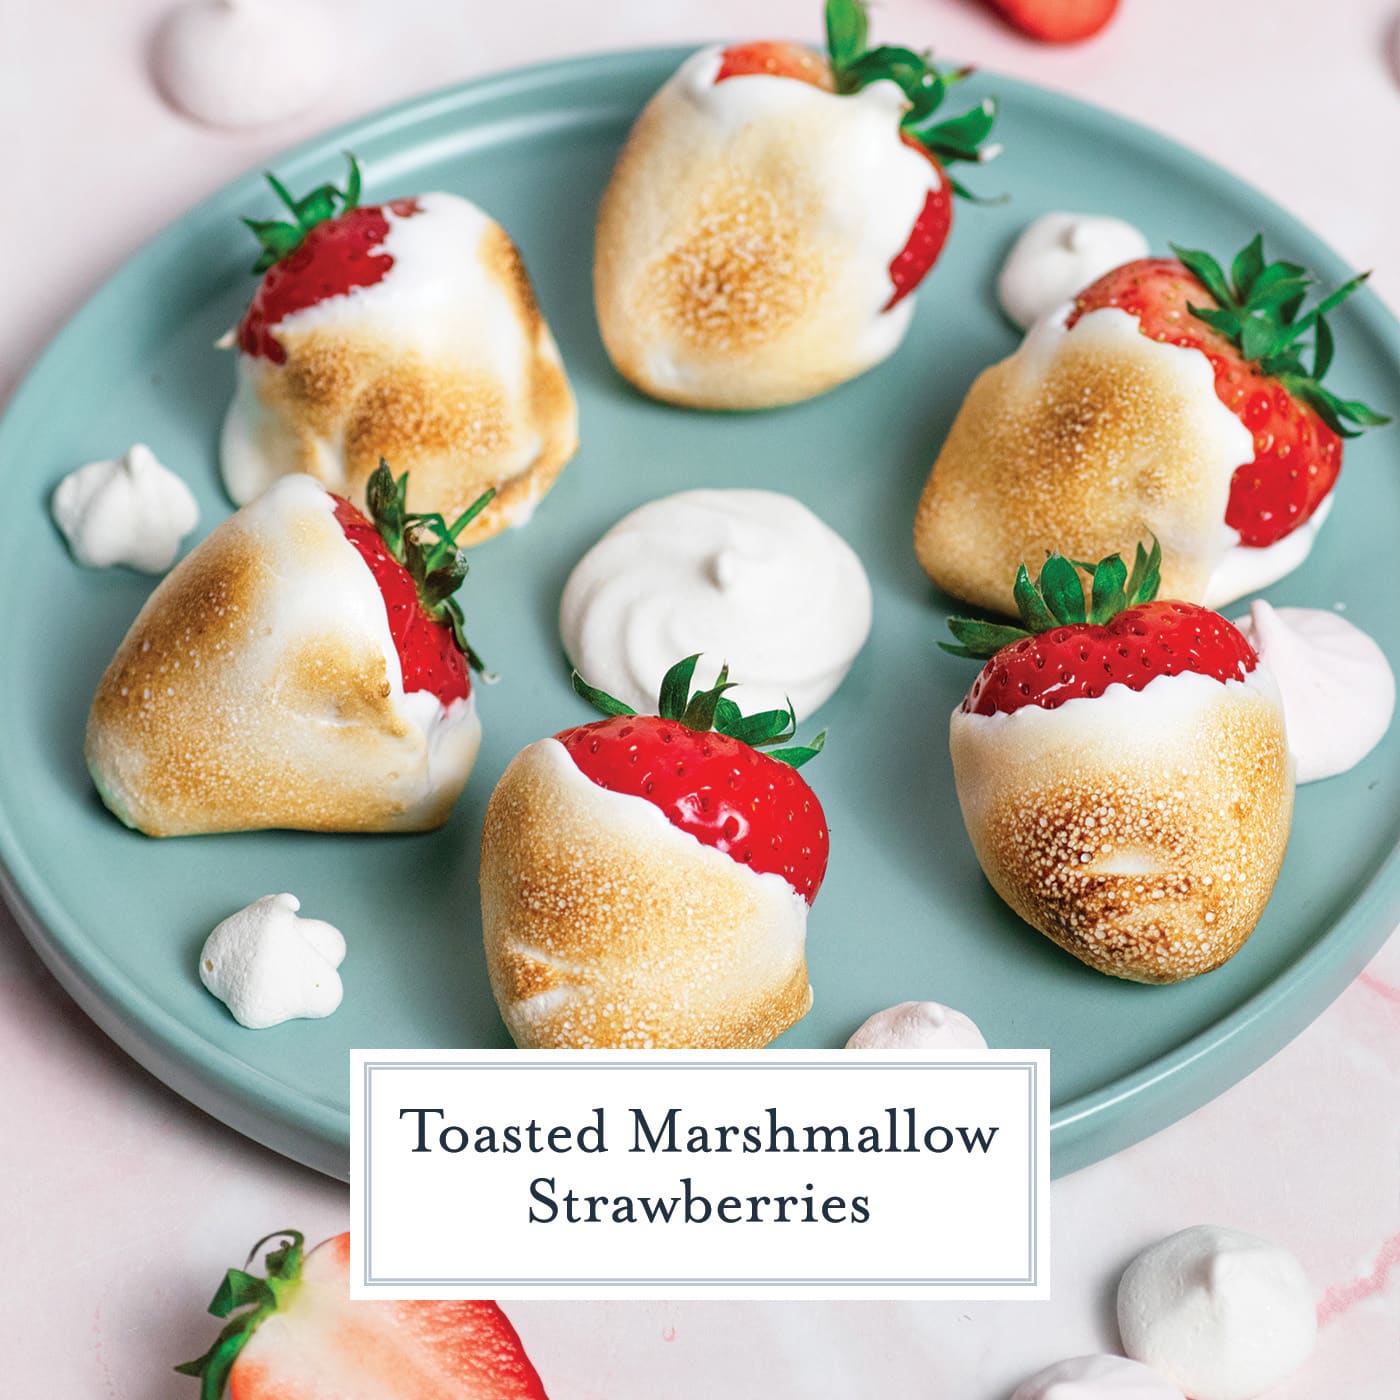 angled shot of toasted marshmallow strawberries on a blue plate with text overlay for facebook